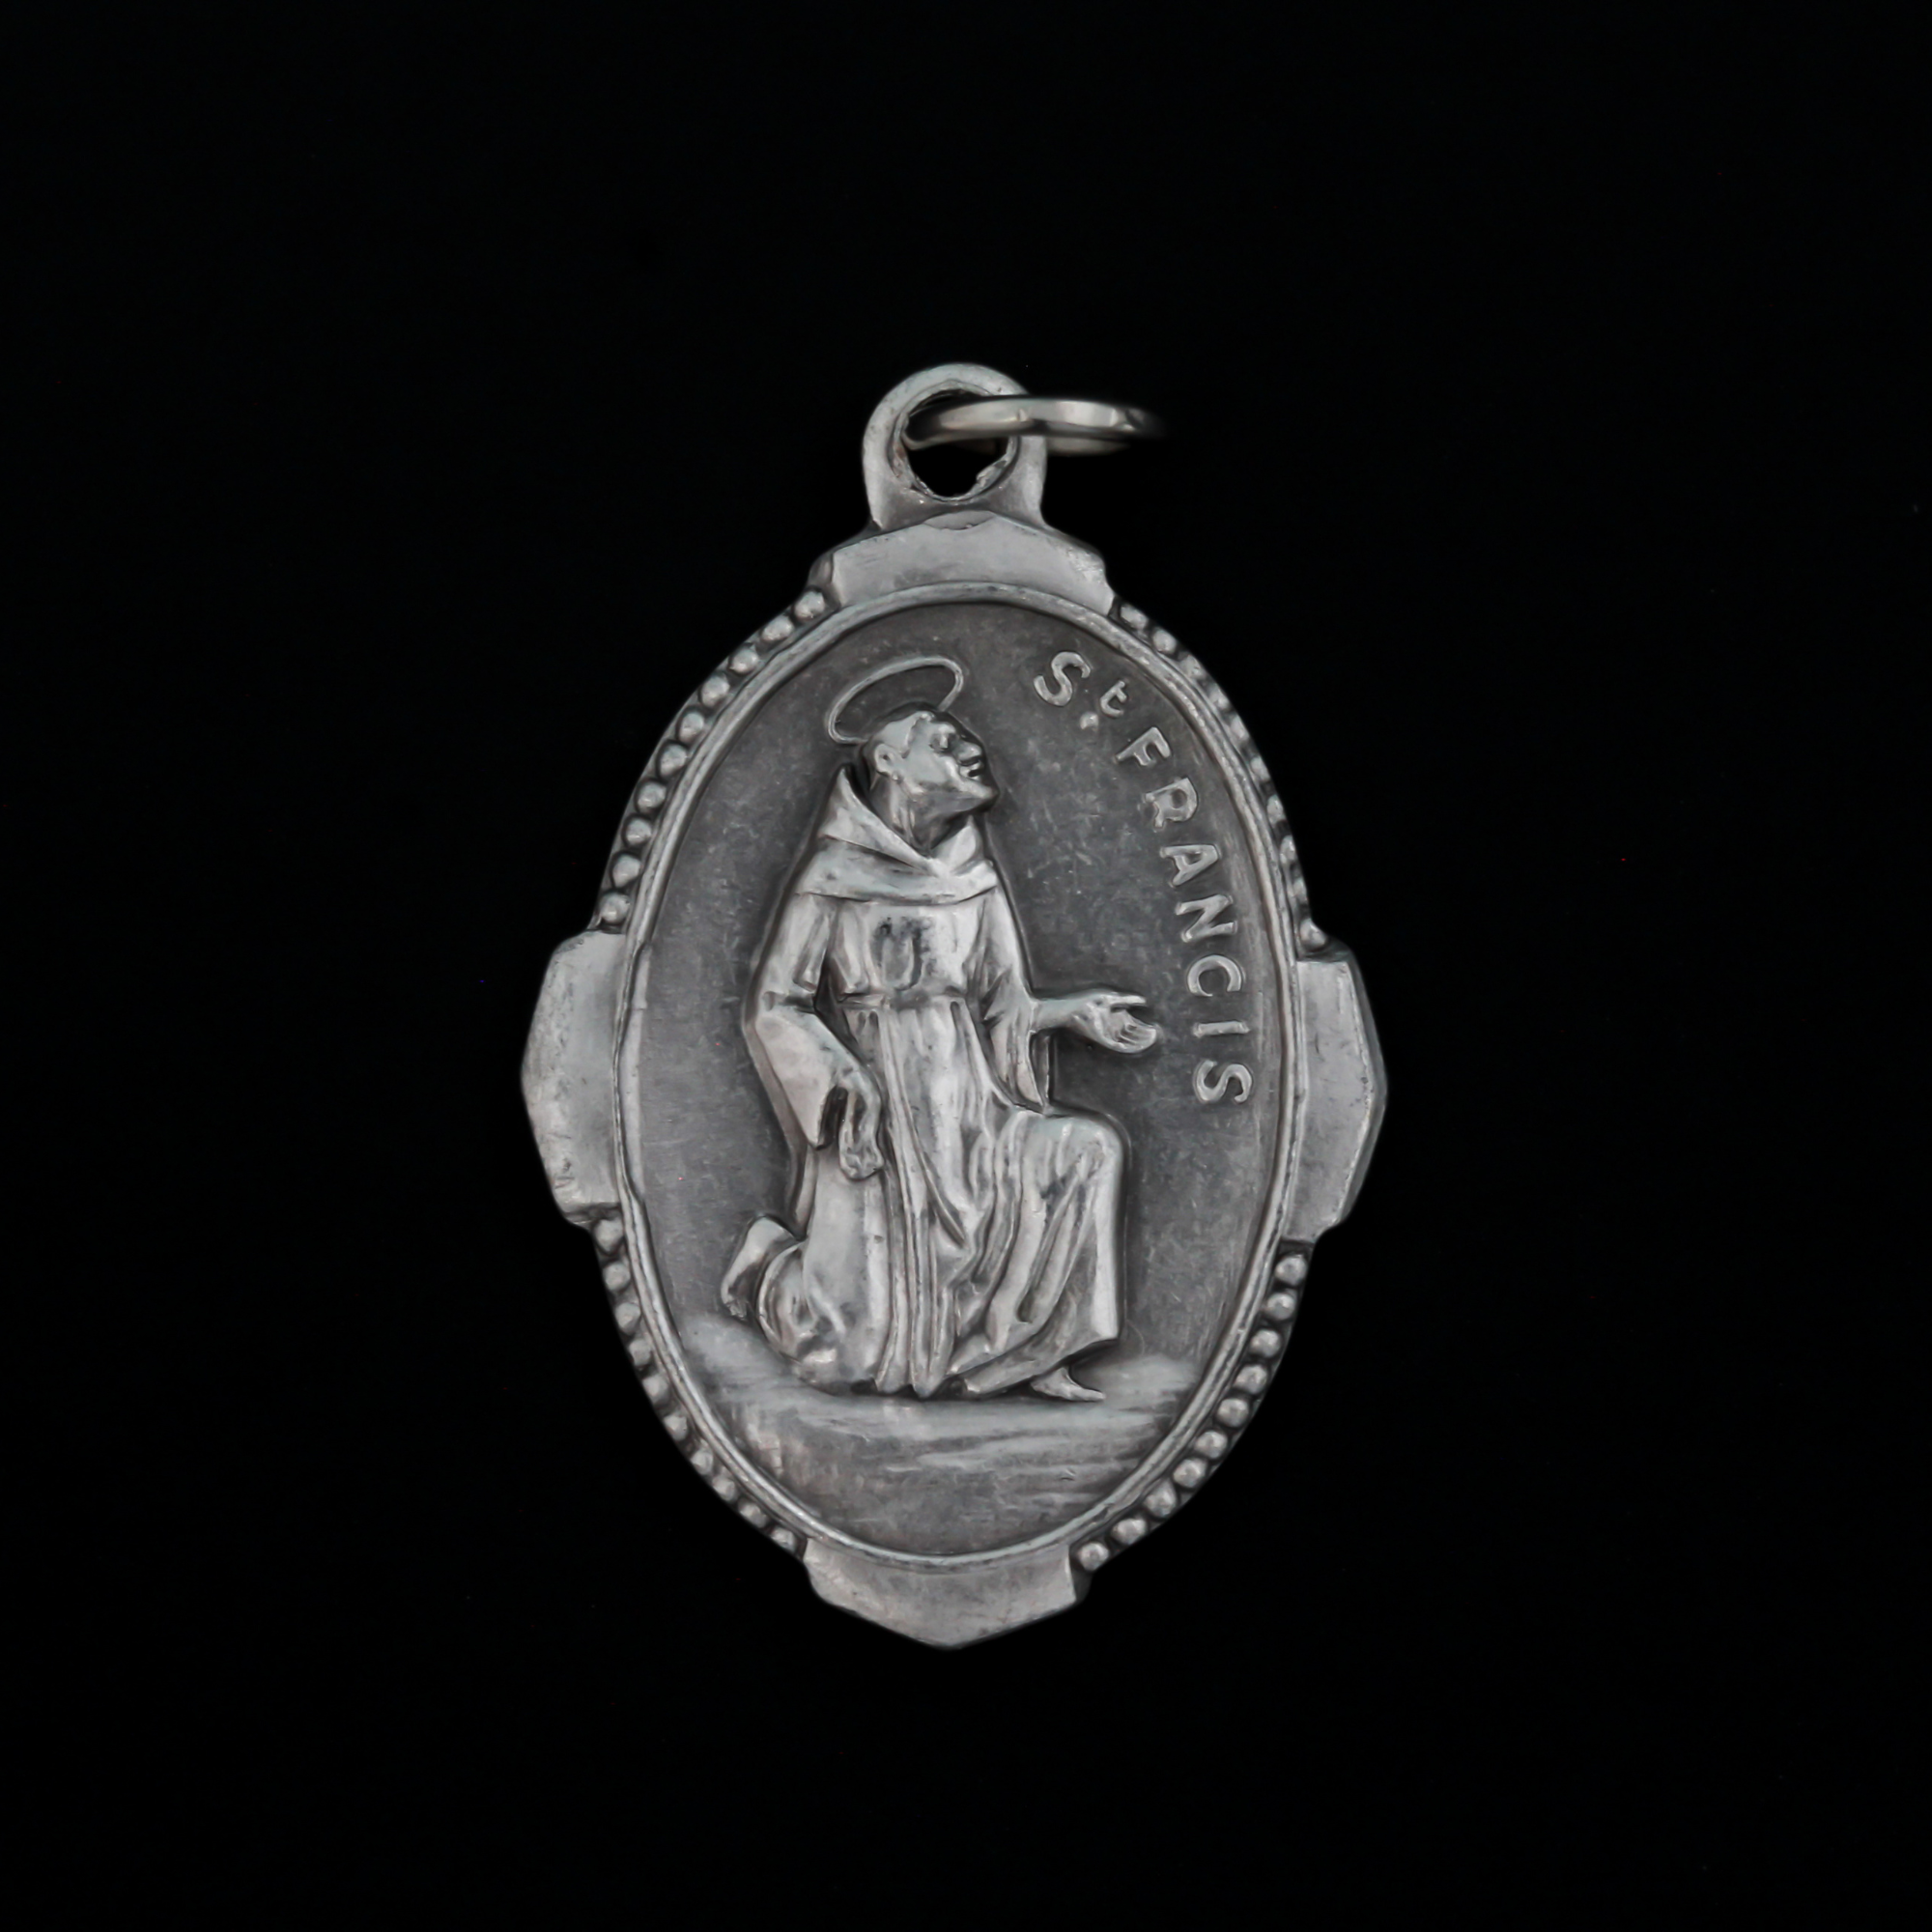 Saint Francis of Assisi medal with deluxe ornate border that depicts the saint on the front and "Pray For Us" on the back